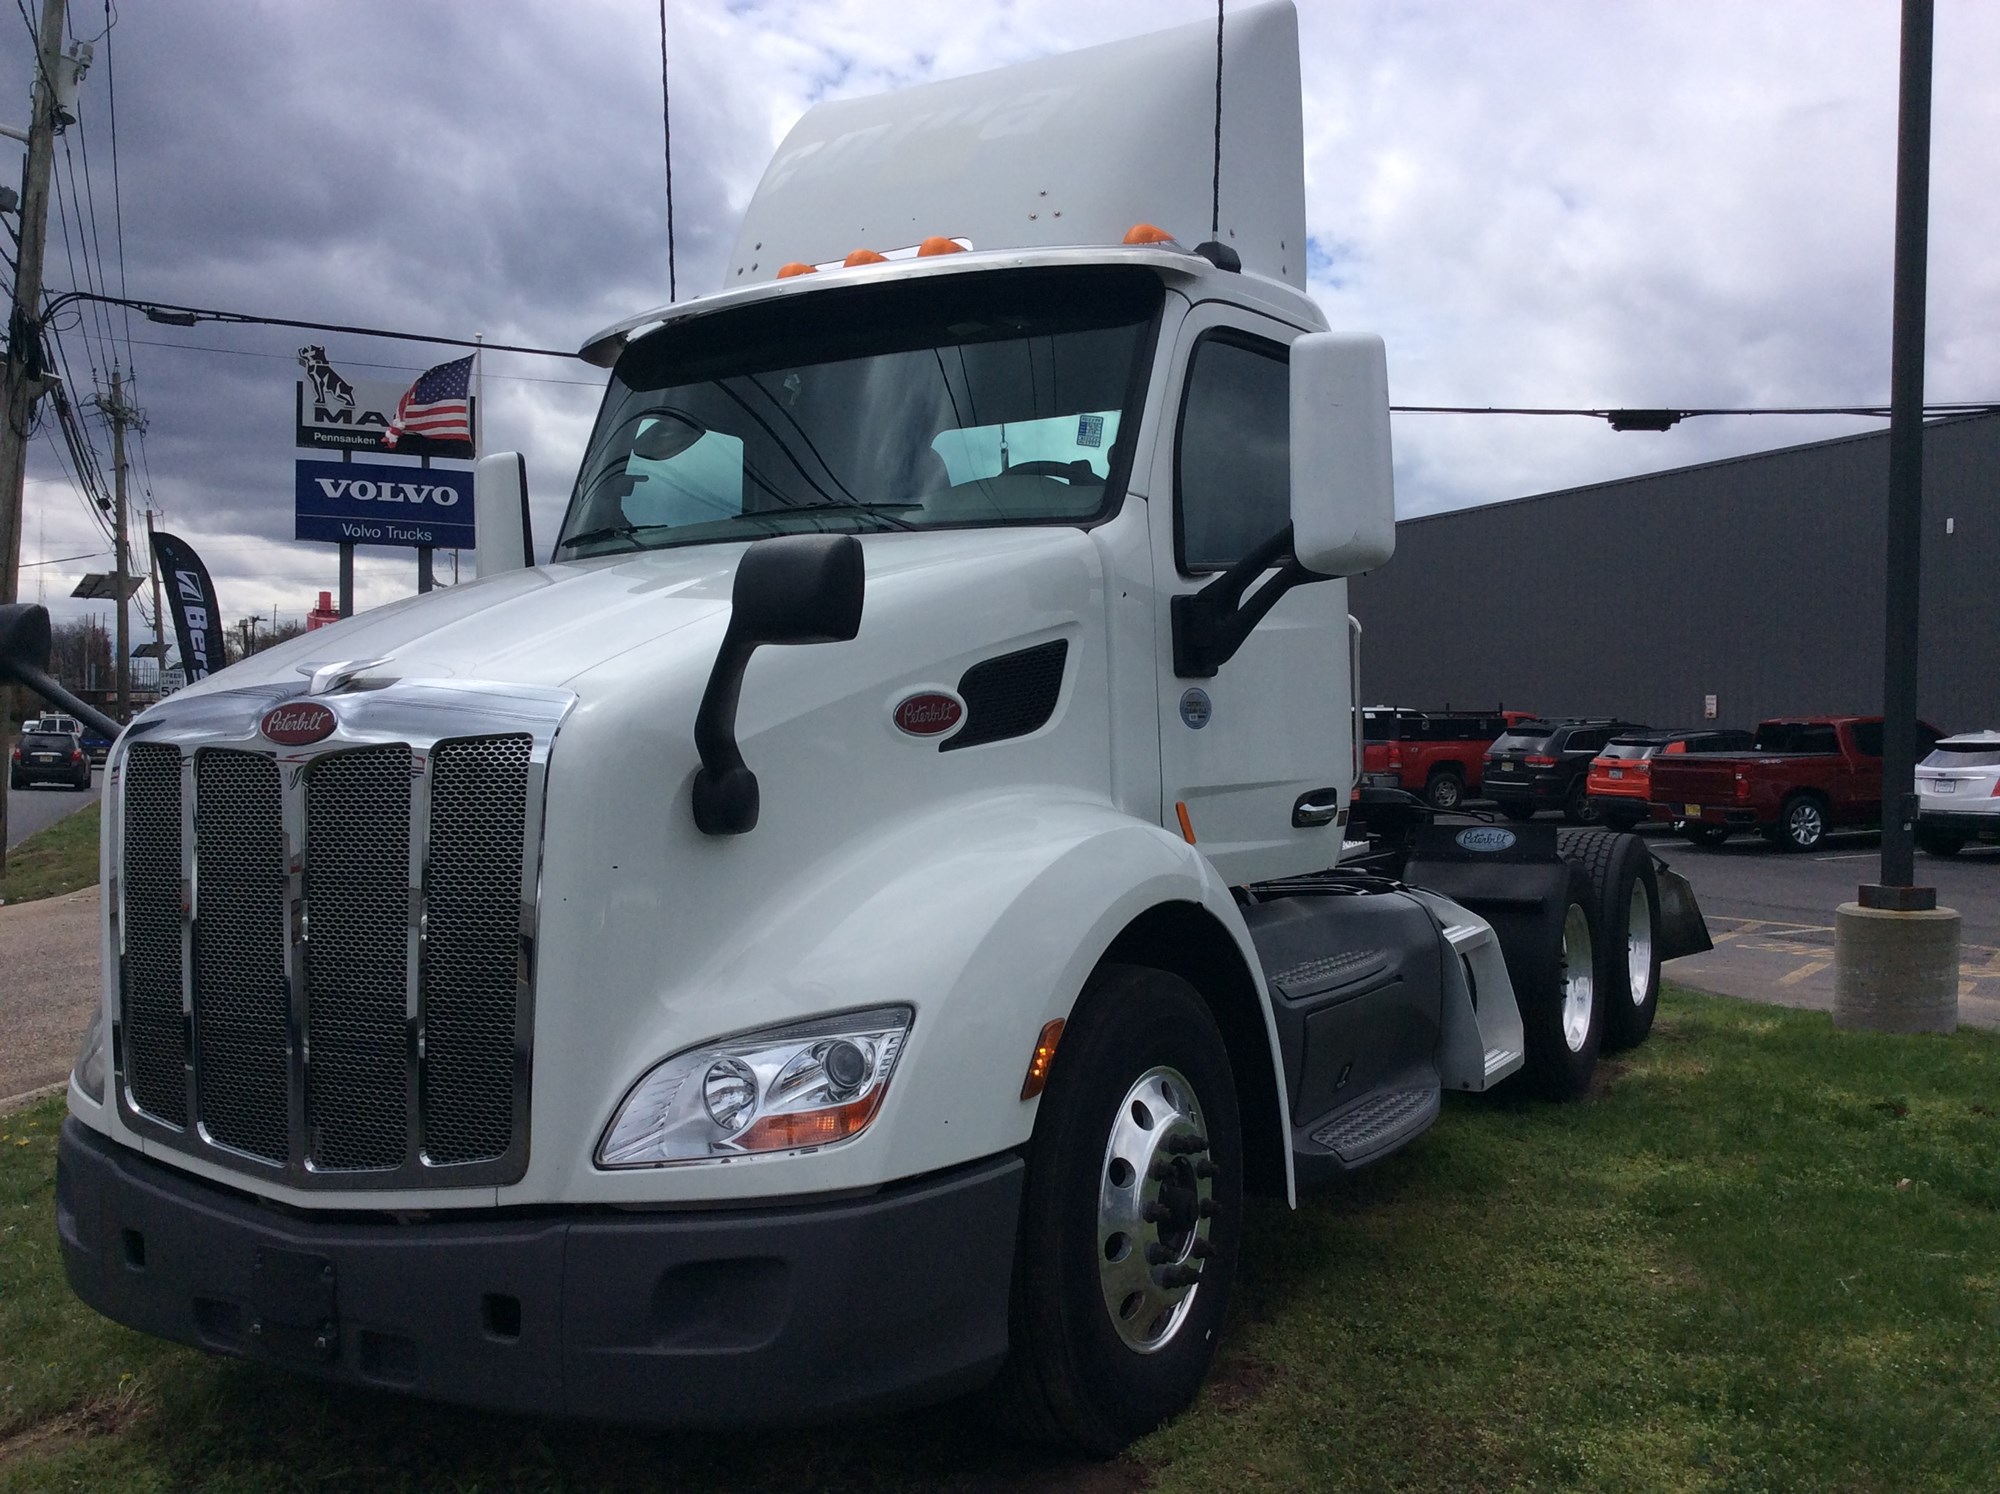 Used Truck Inventory - 1000878 01 - 97